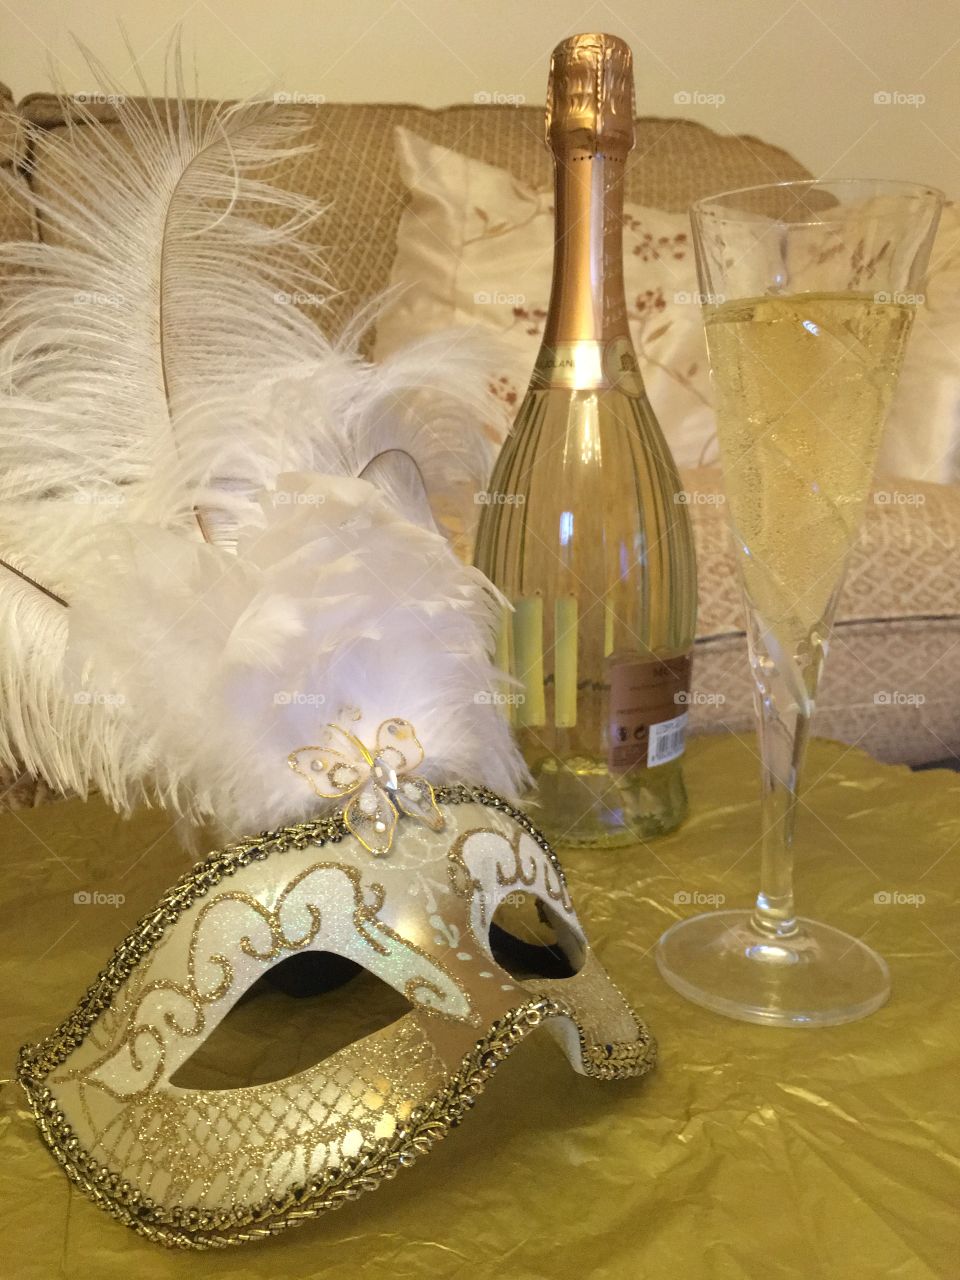 Gold Venetian masquerade mask with a bottle of Moscato And a glass of white grape juice 